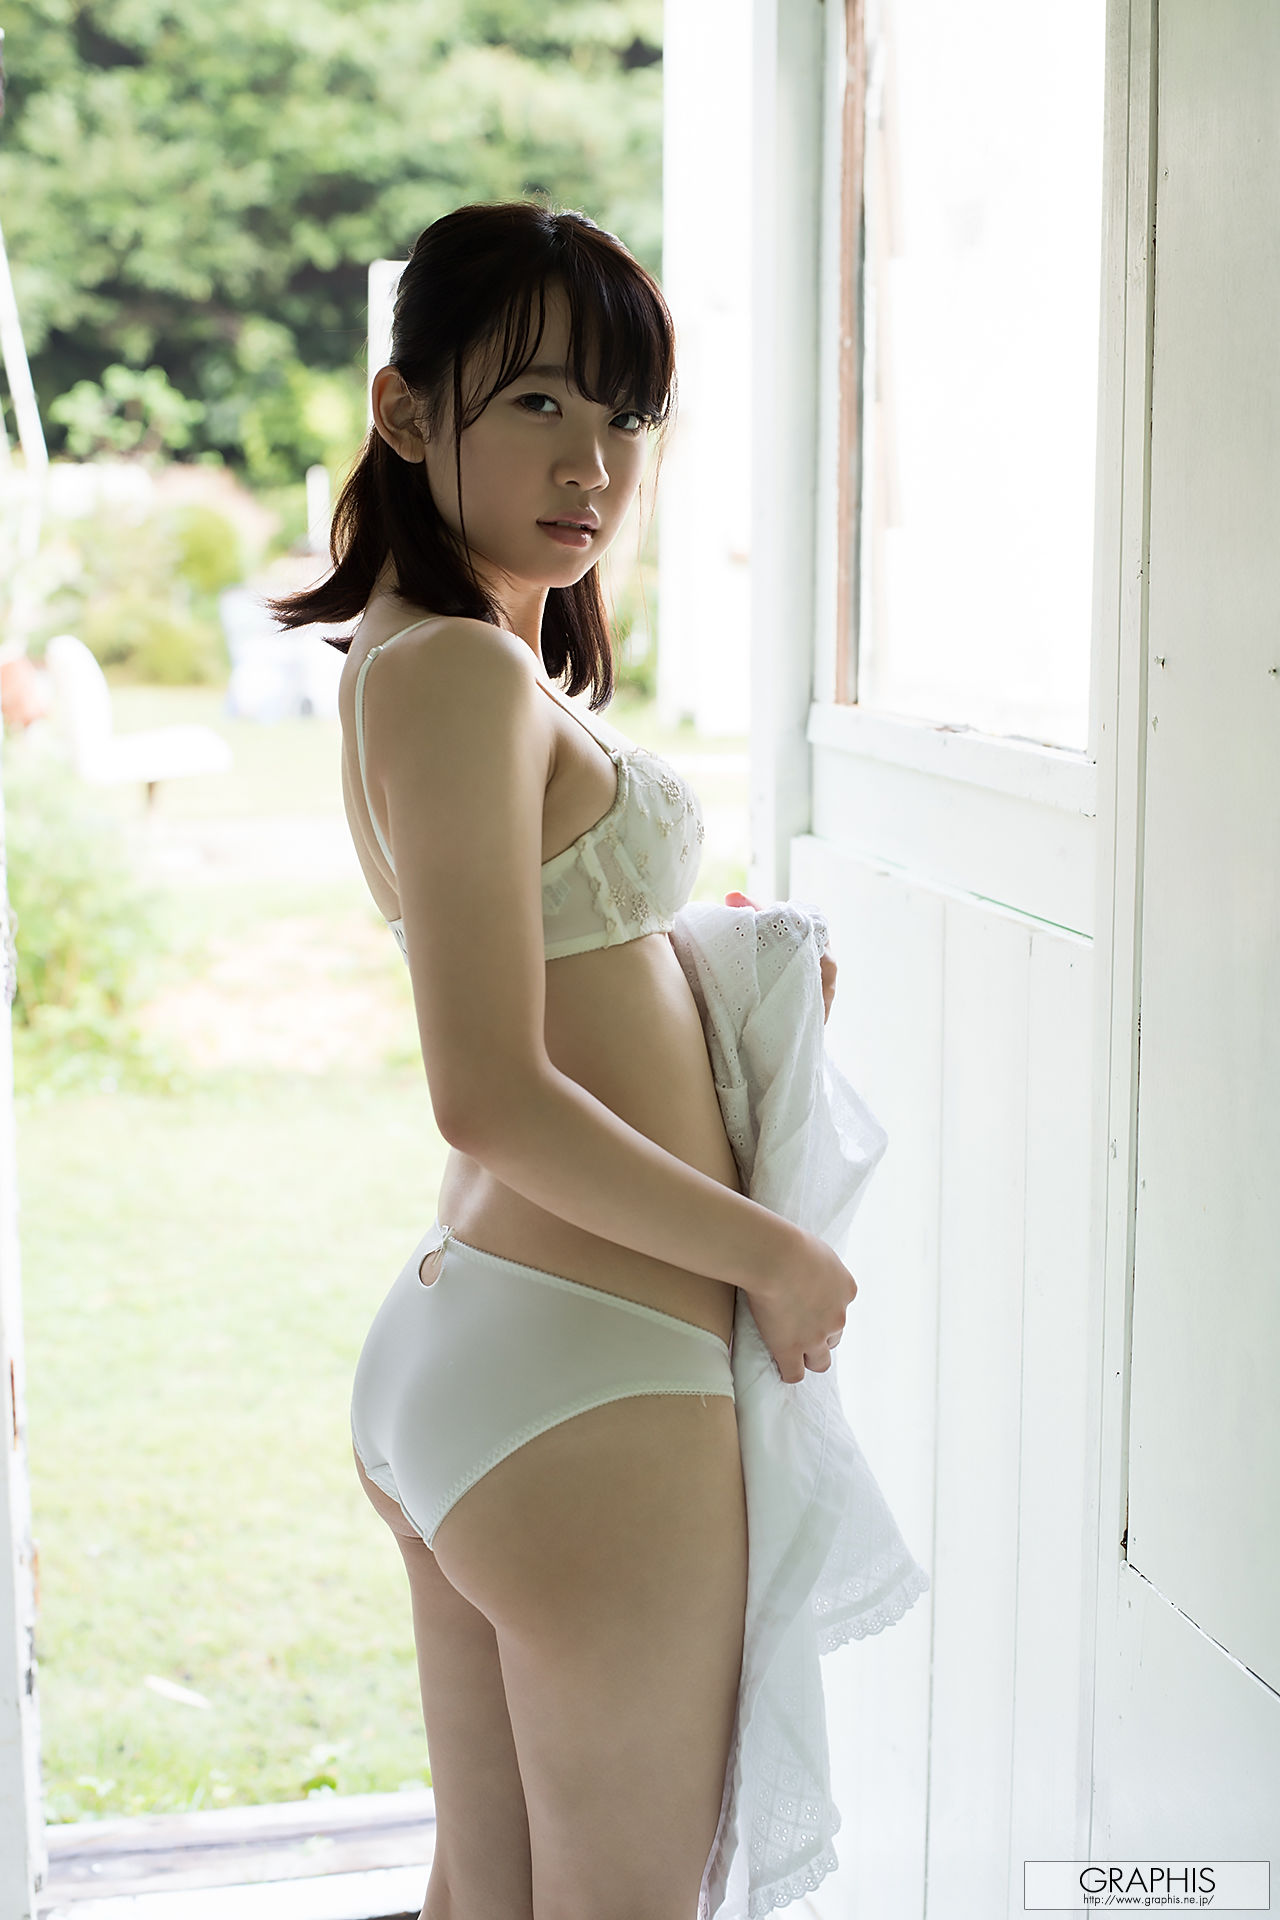 Yura Kano is anger [graphis] first gravure